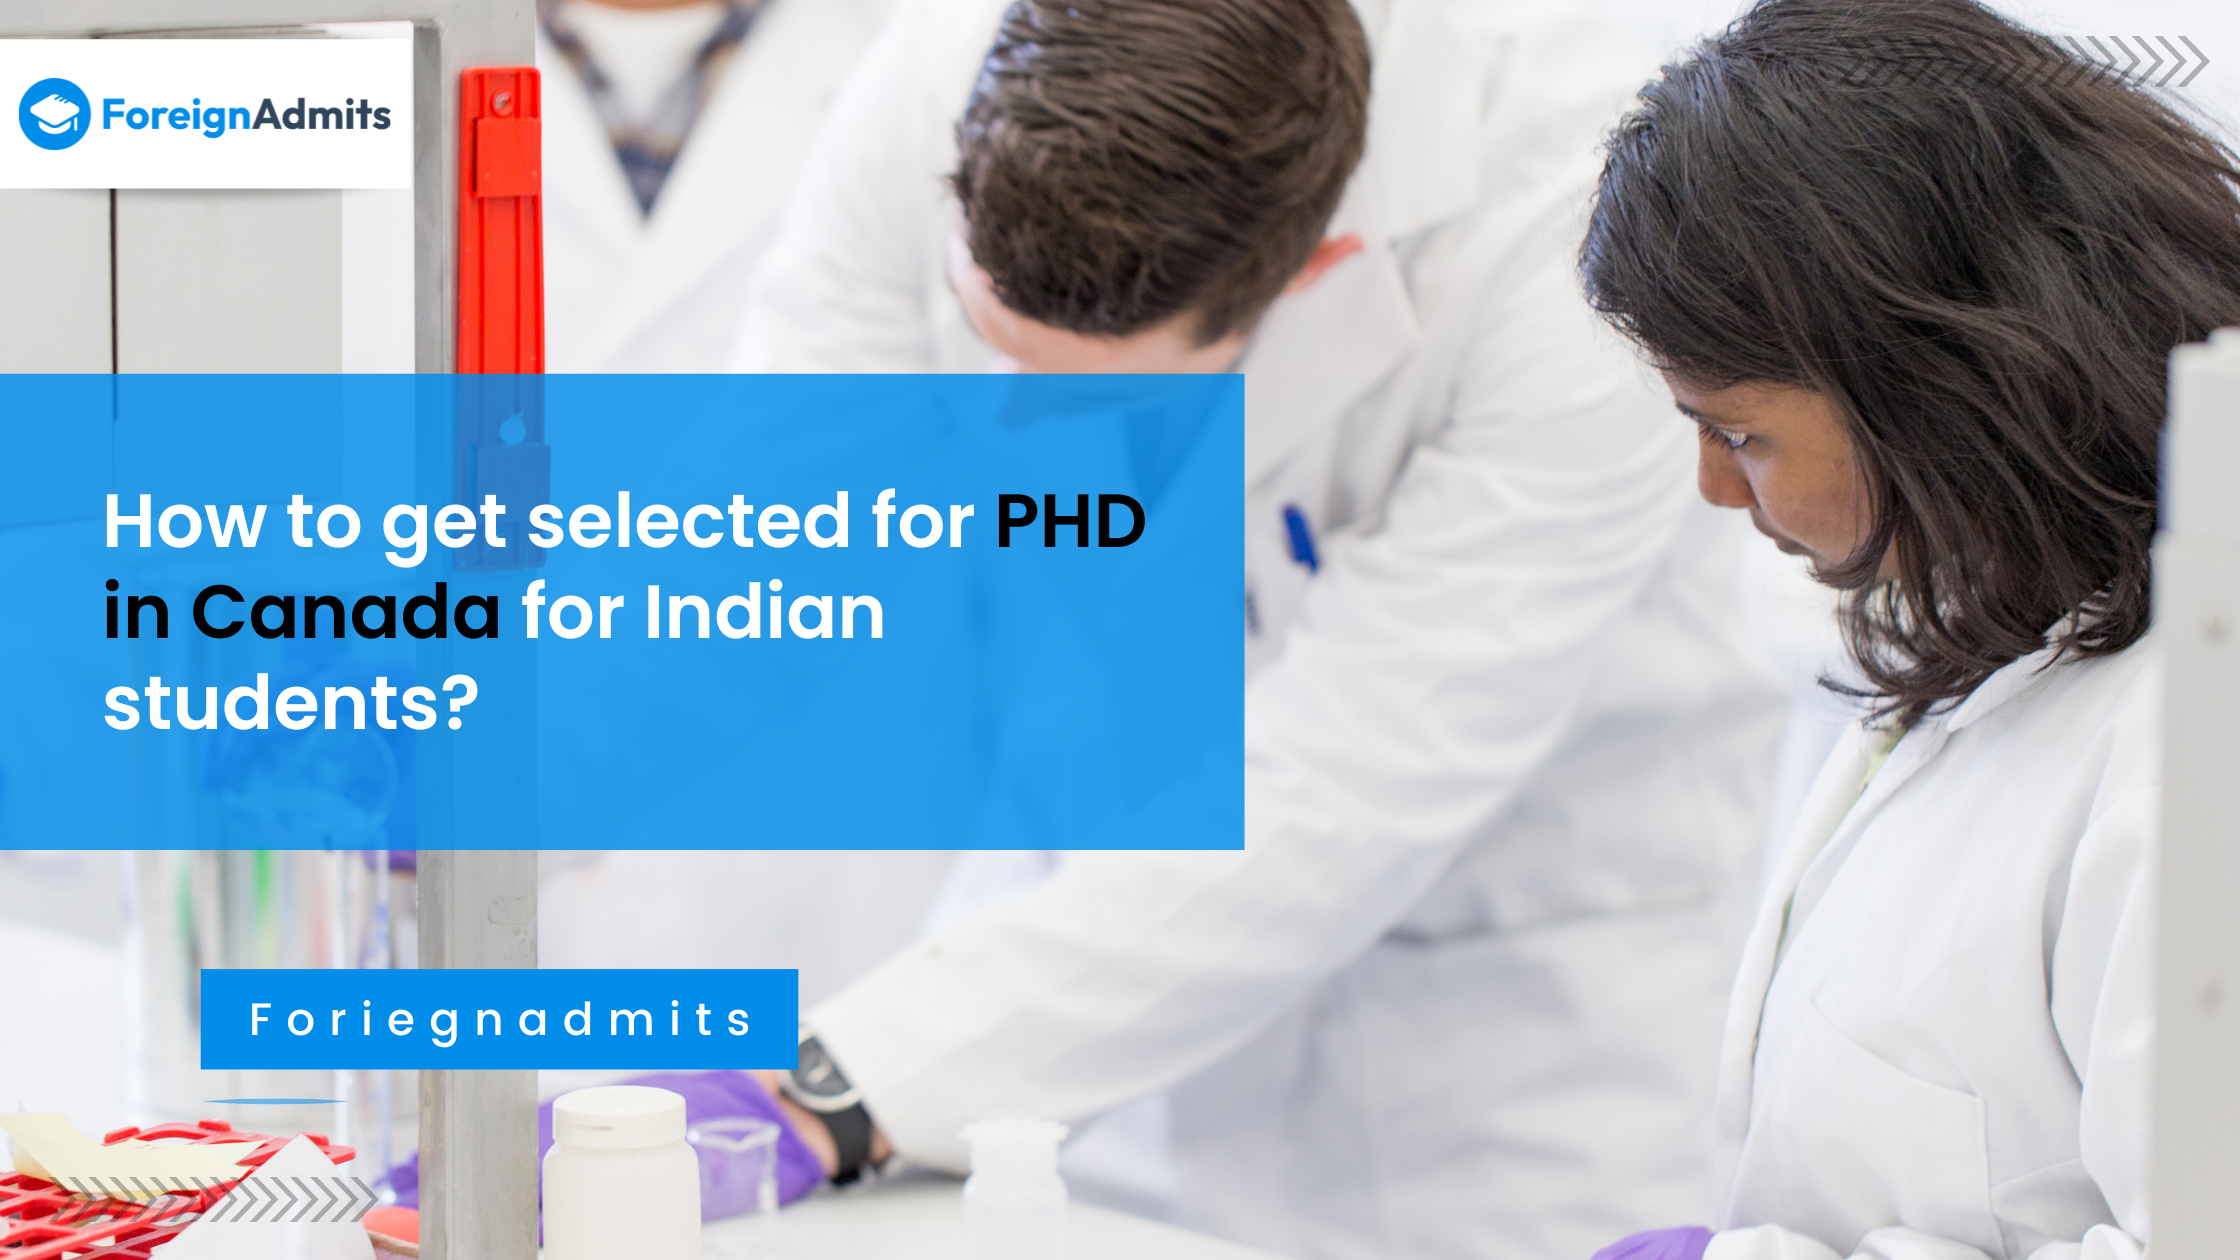 How to get selected for PHD in Canada for Indian students?